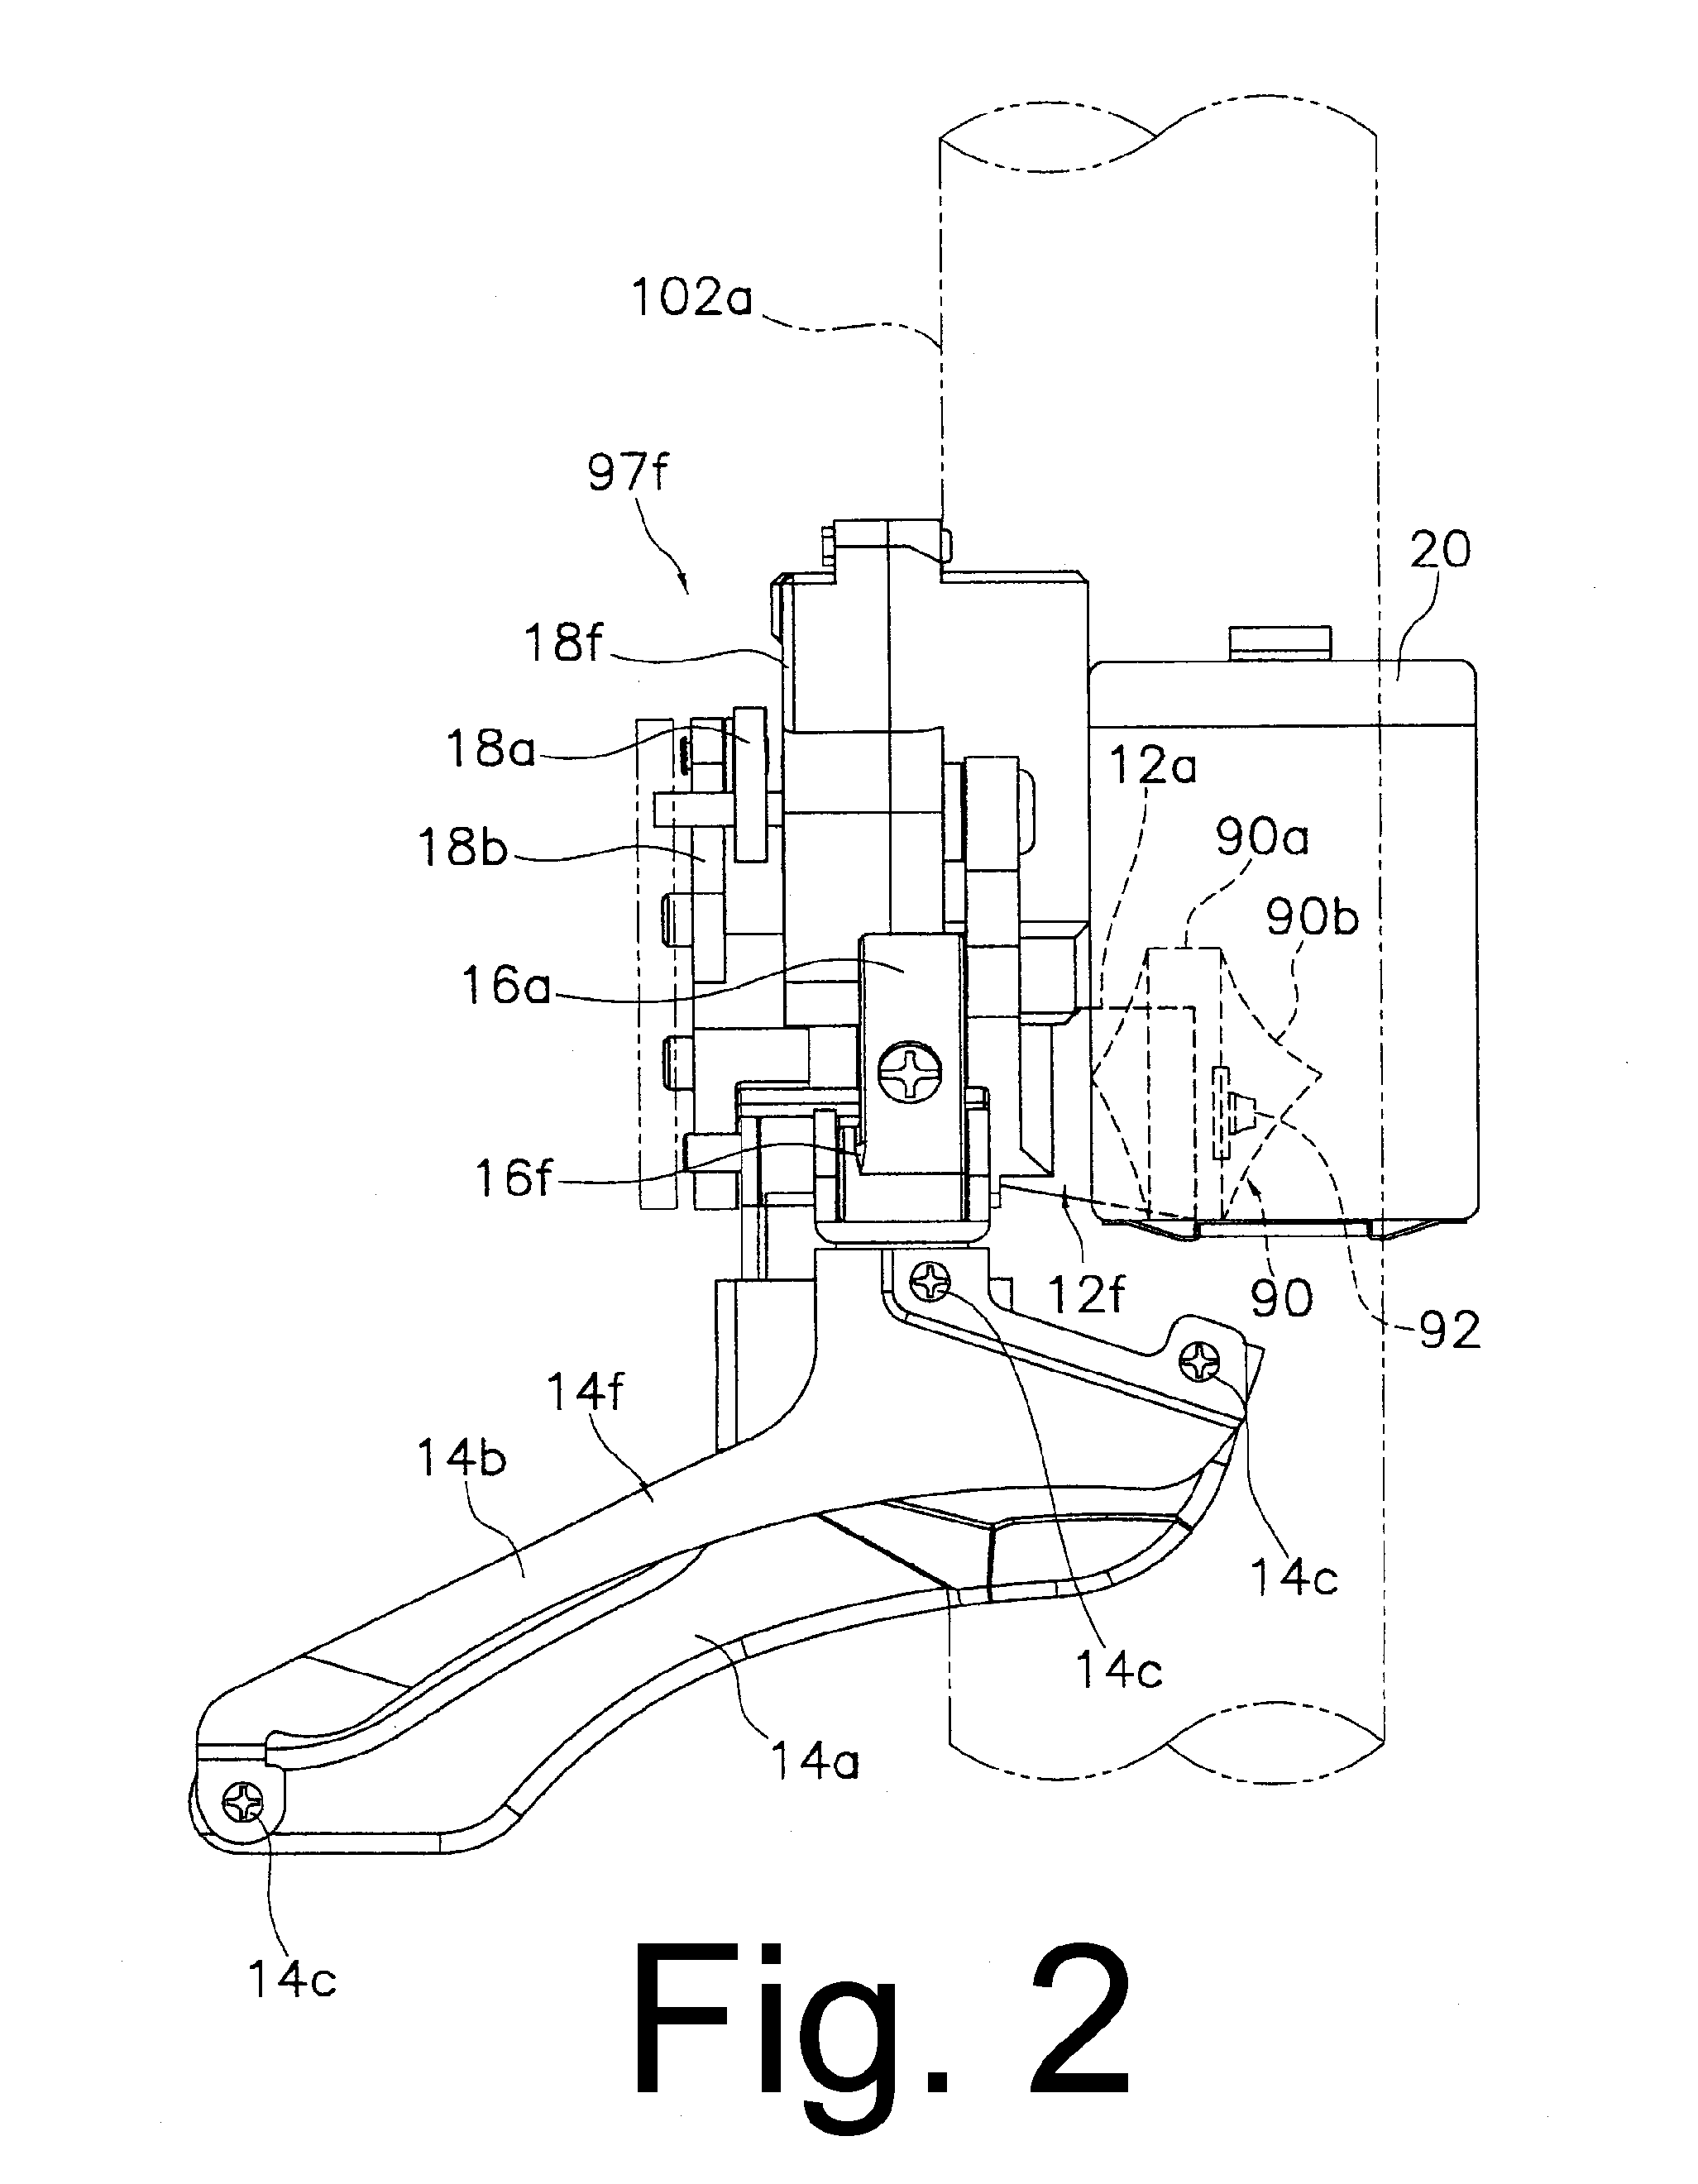 Bicycle derailleur apparatus with a supported power supply